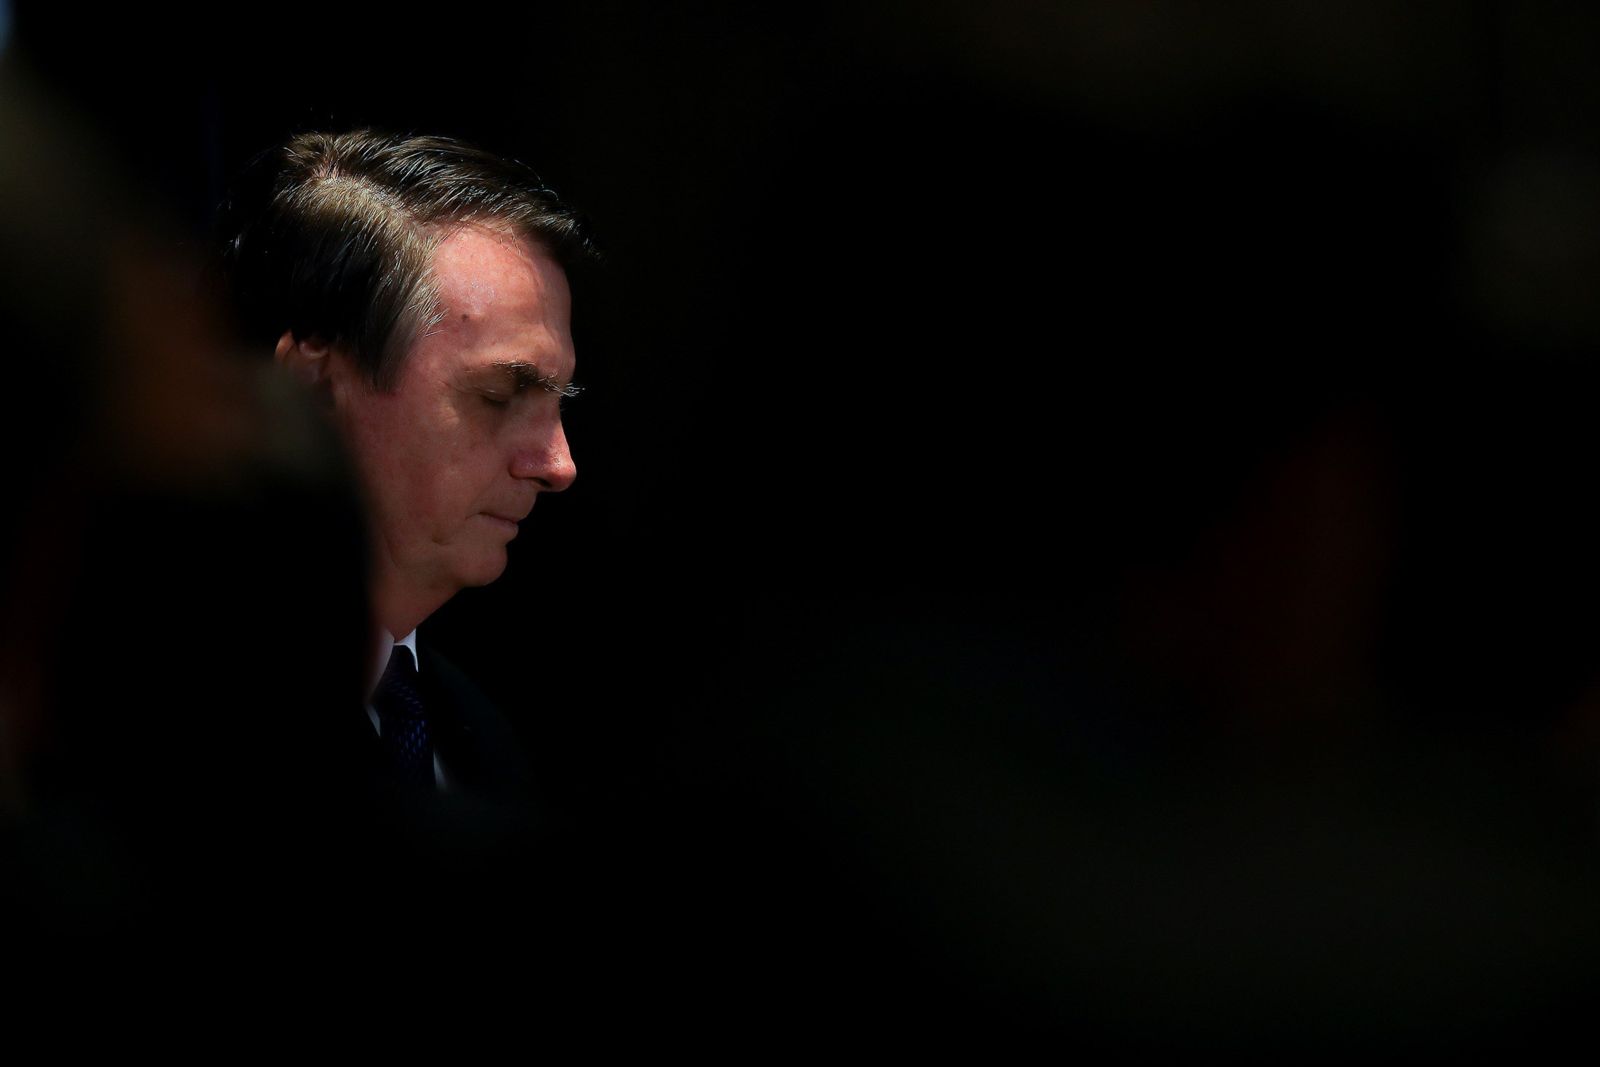 Confronting Bolsonaro’s populism – key strategies to protect human rights